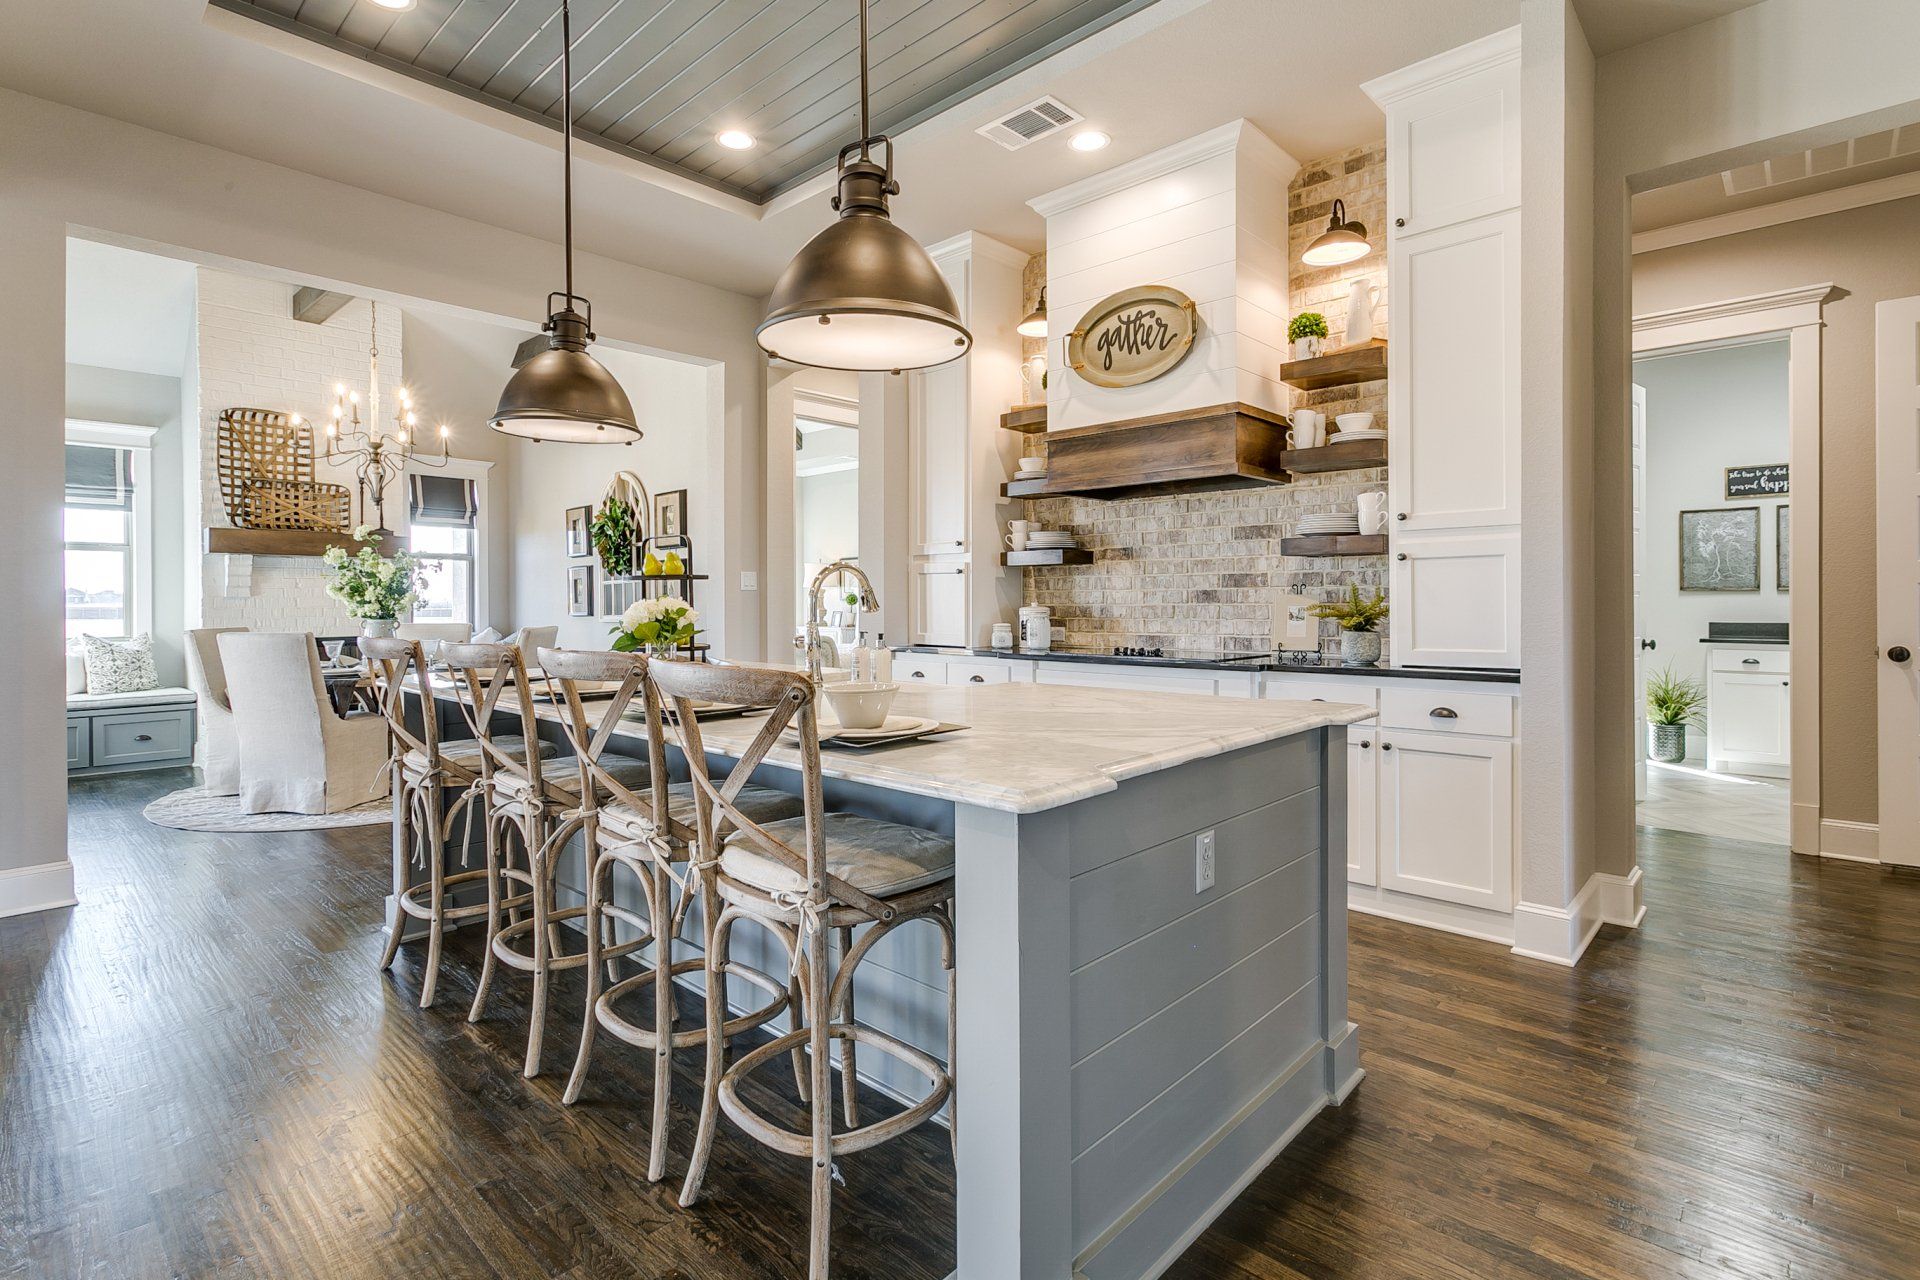 Elegant kitchen area | 3D Floor Plan Tour | Our Gallery | John Houston Homes | New Homes for Sale in Dallas-Fort Worth, Waco and surrounding areas.